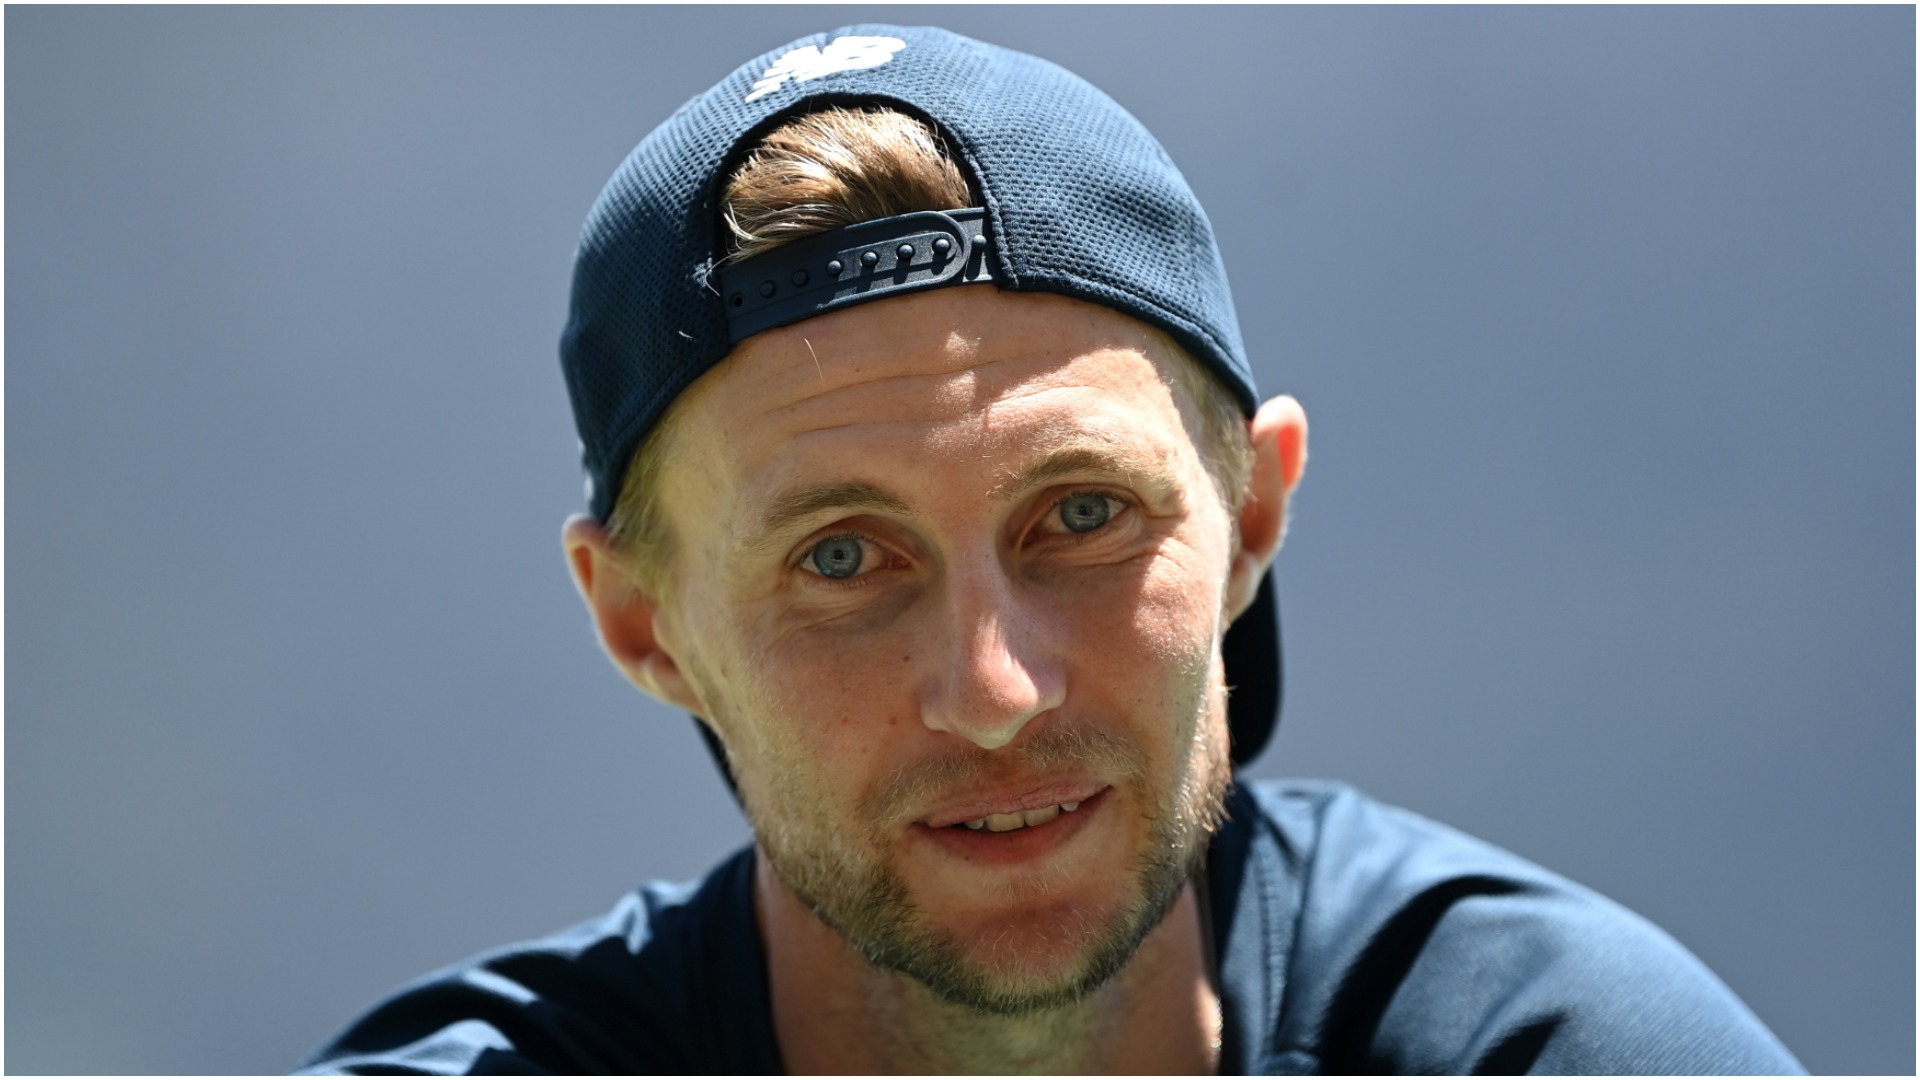 Joe Root conceded the fewest runs in a Test five-wicket haul for an England player since 1924, helping peg back India.